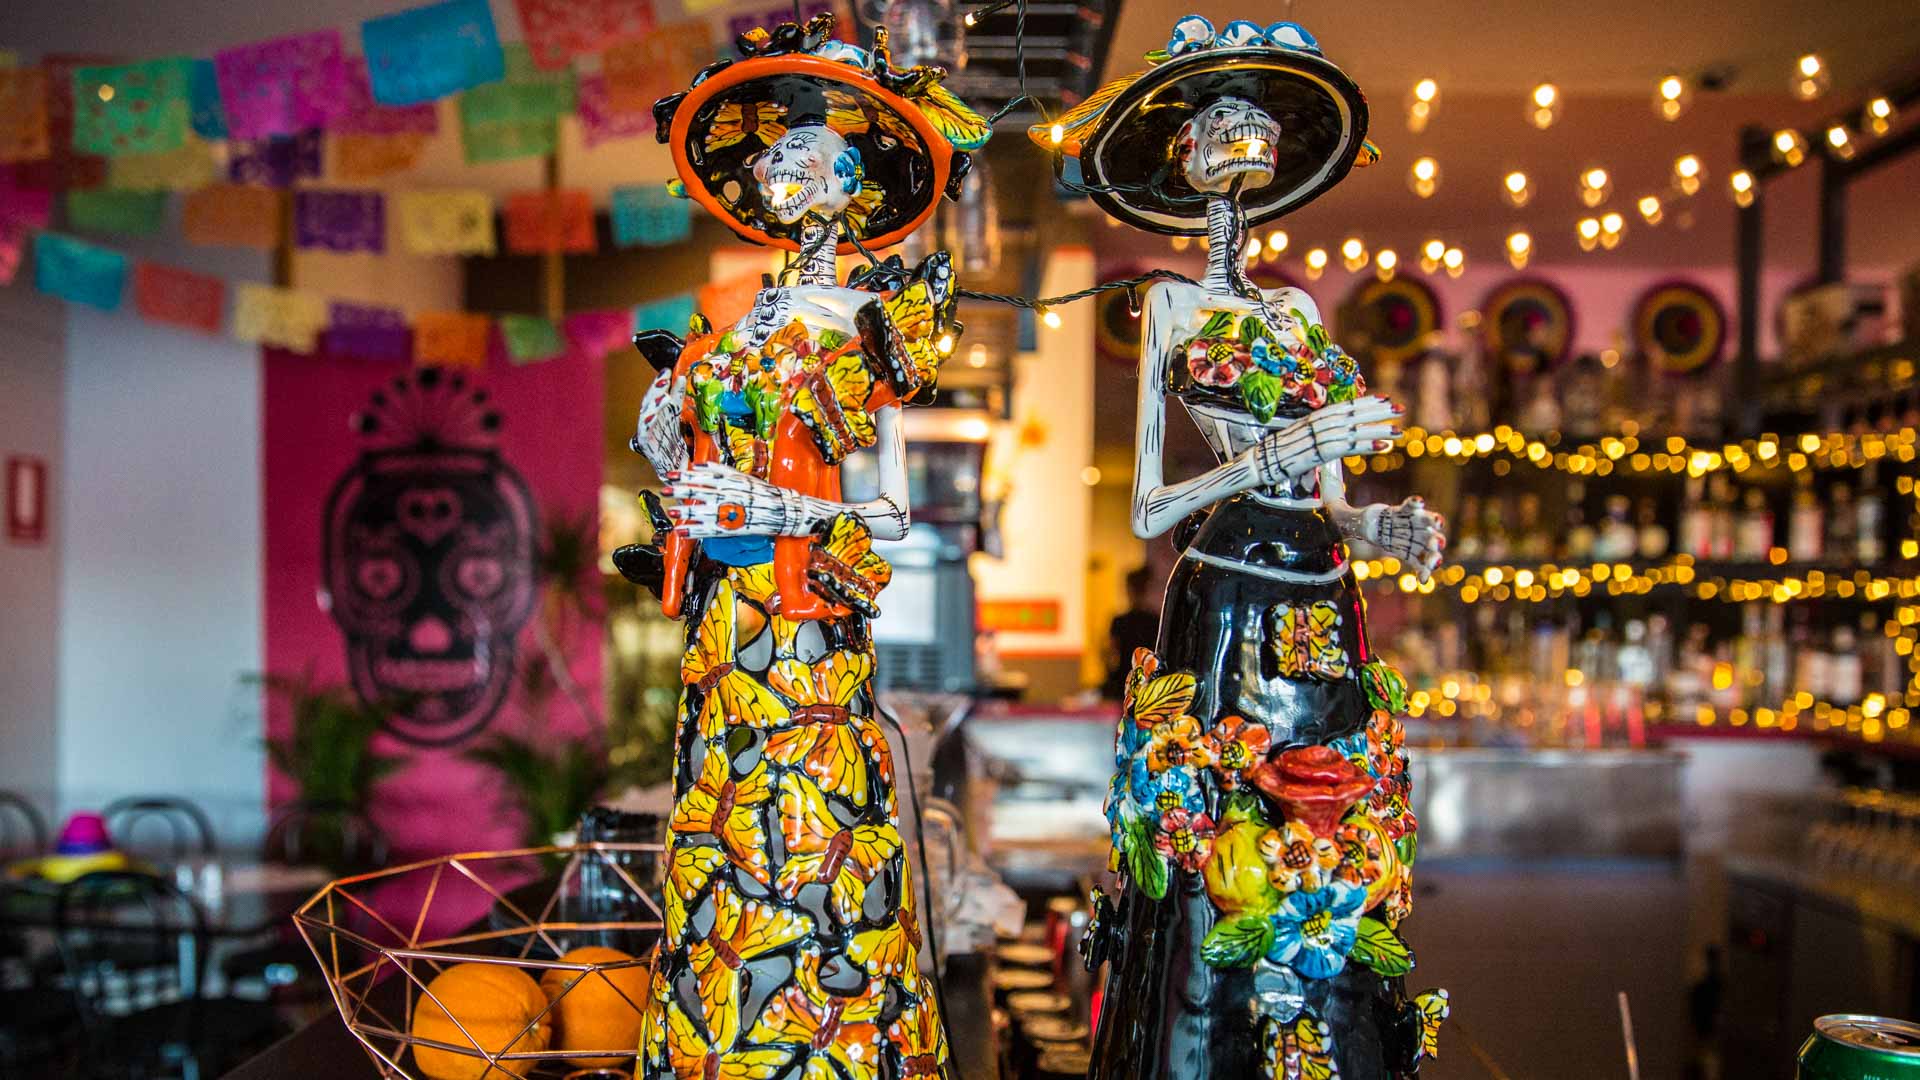 Five Food and Cocktail Pairings to Try at Coogee's New Mexican Cantina